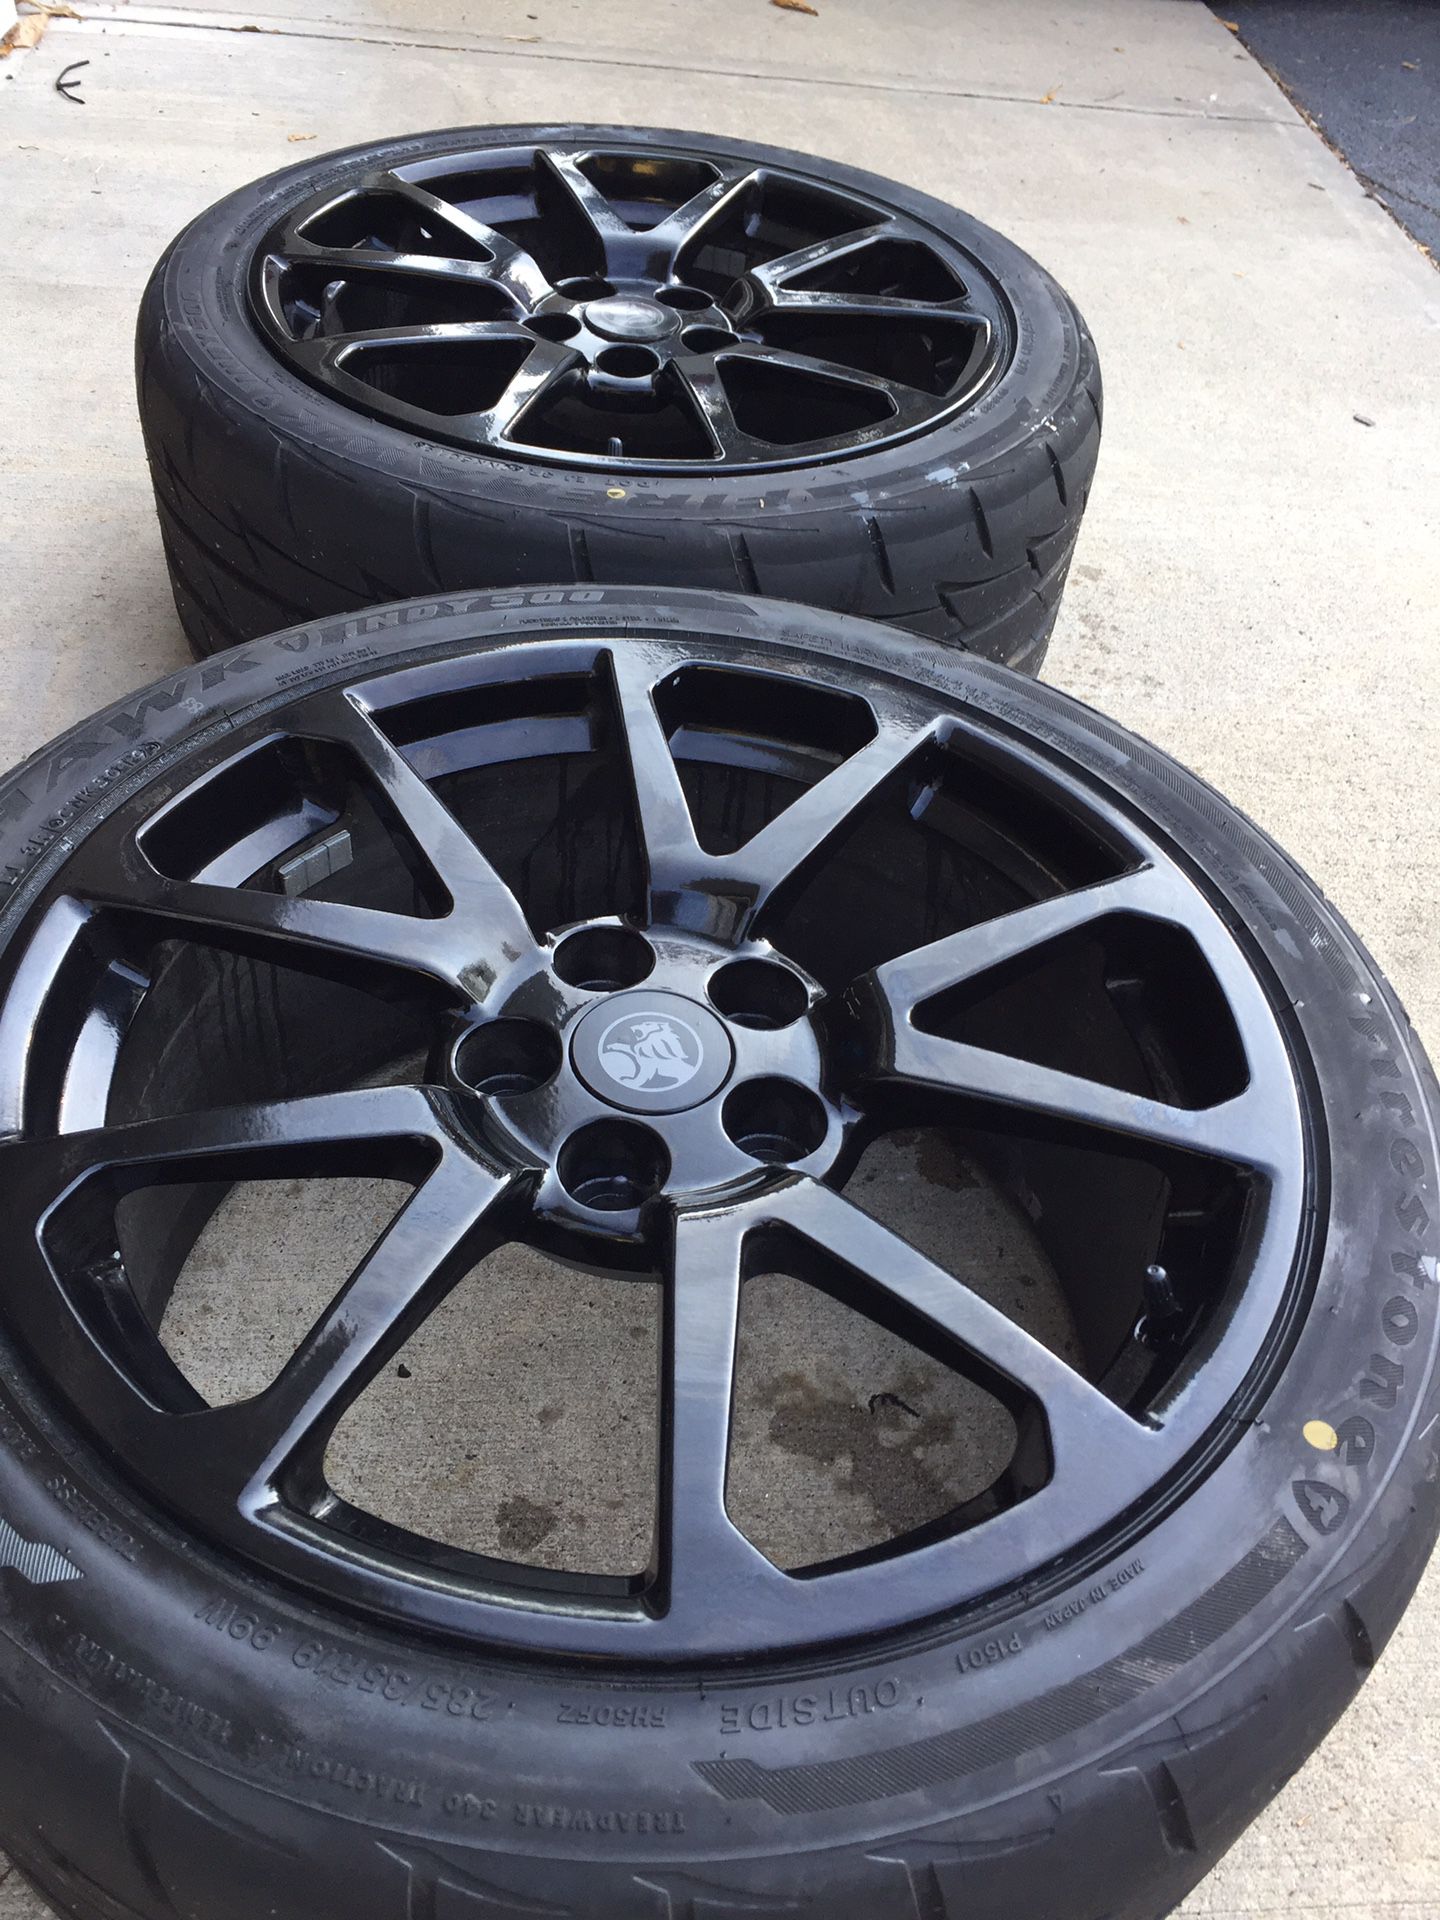 Cts-v sedan wheels and Indy 500 tires